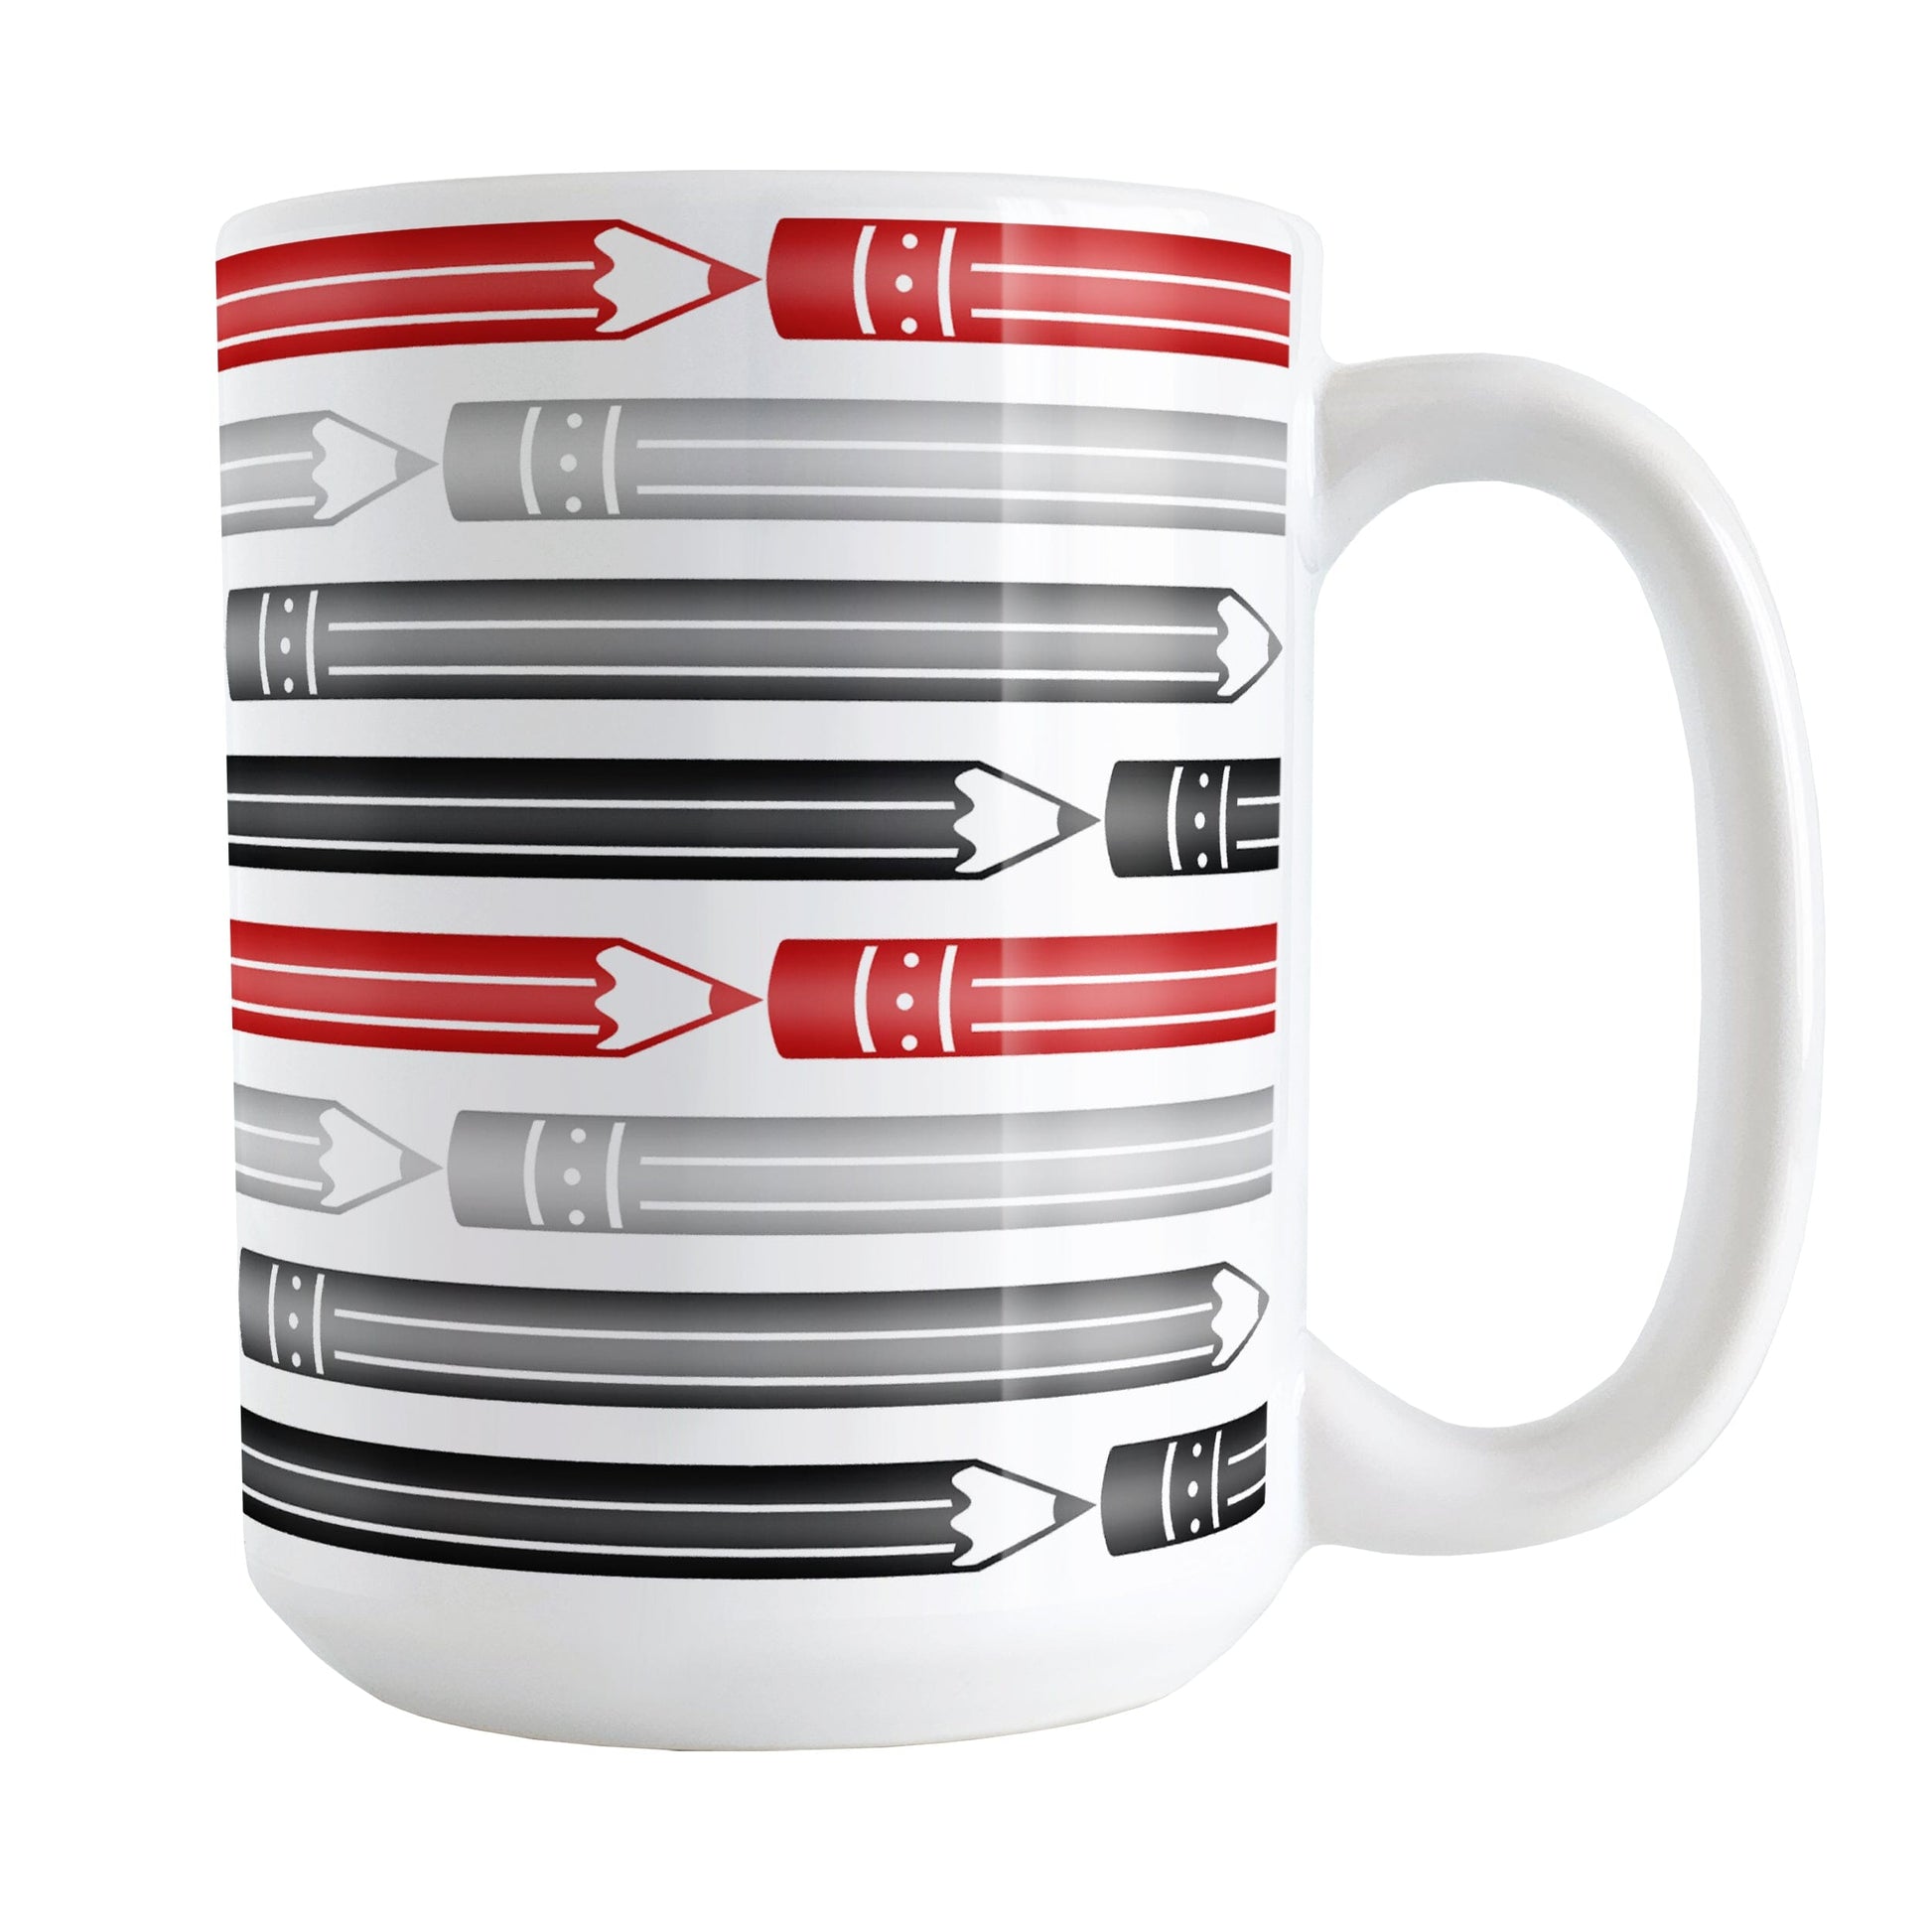 Red Gray Black Pencils Pattern Mug (15oz) at Amy's Coffee Mugs. A ceramic coffee mug designed with a horizontal pencils in red, gray, and black, stacked in a pattern that wraps around the mug to the handle. 